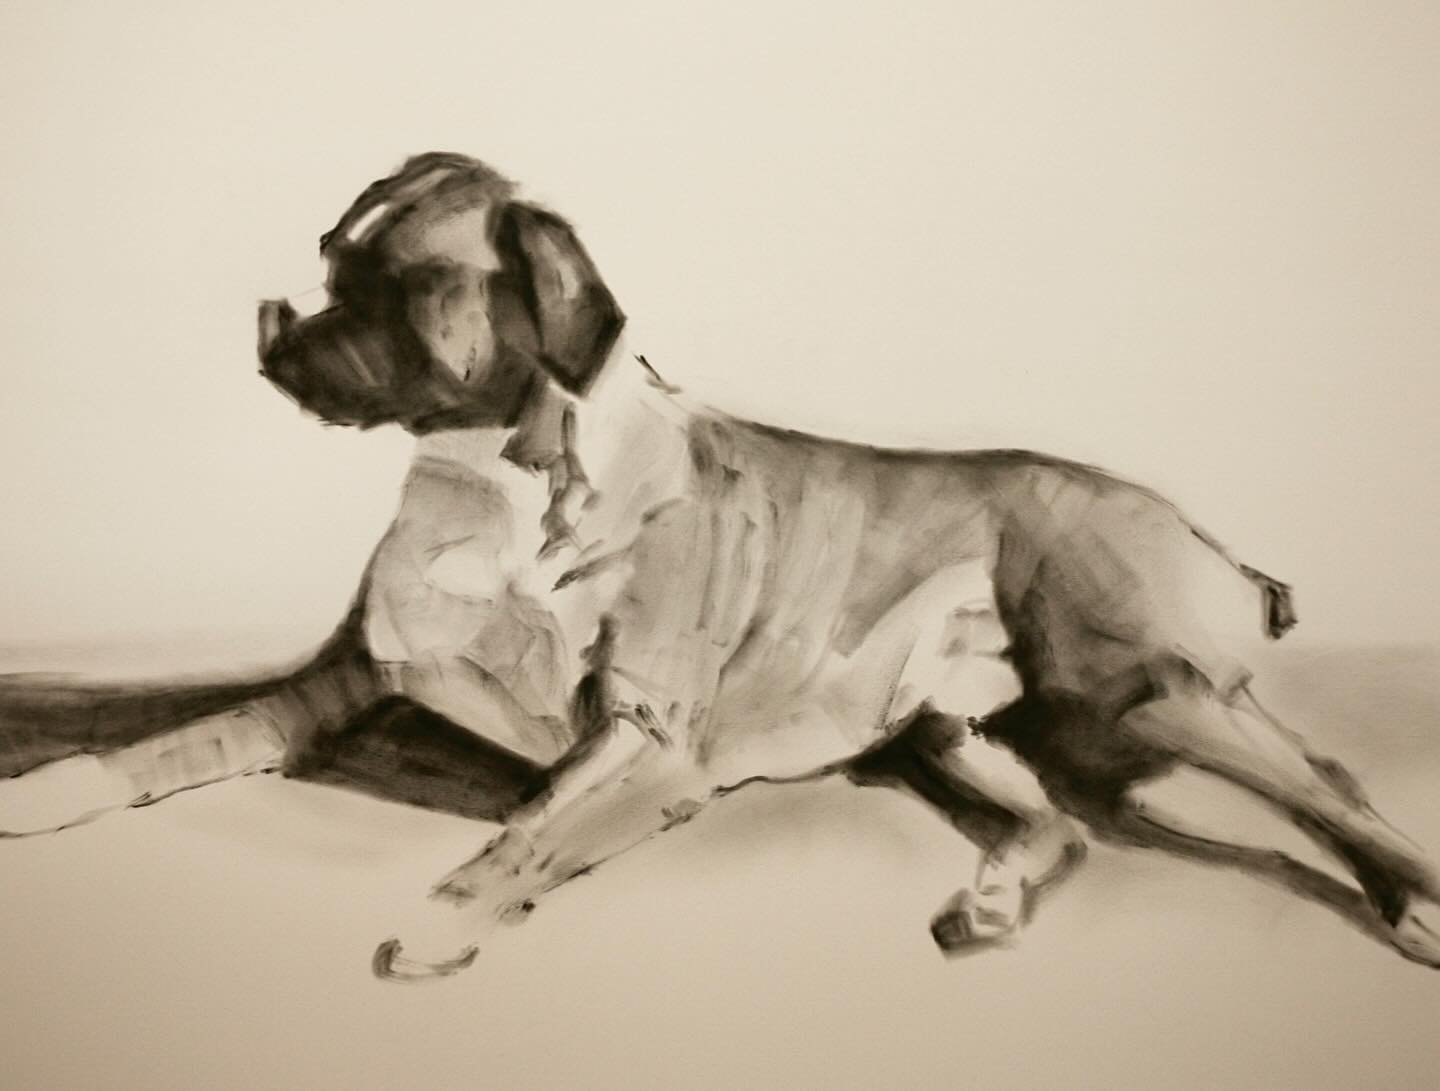 Pastel and charcoal drawing of a boxer and a poodle.

#pasteldrawing #boxerdog #poodle #niebergart